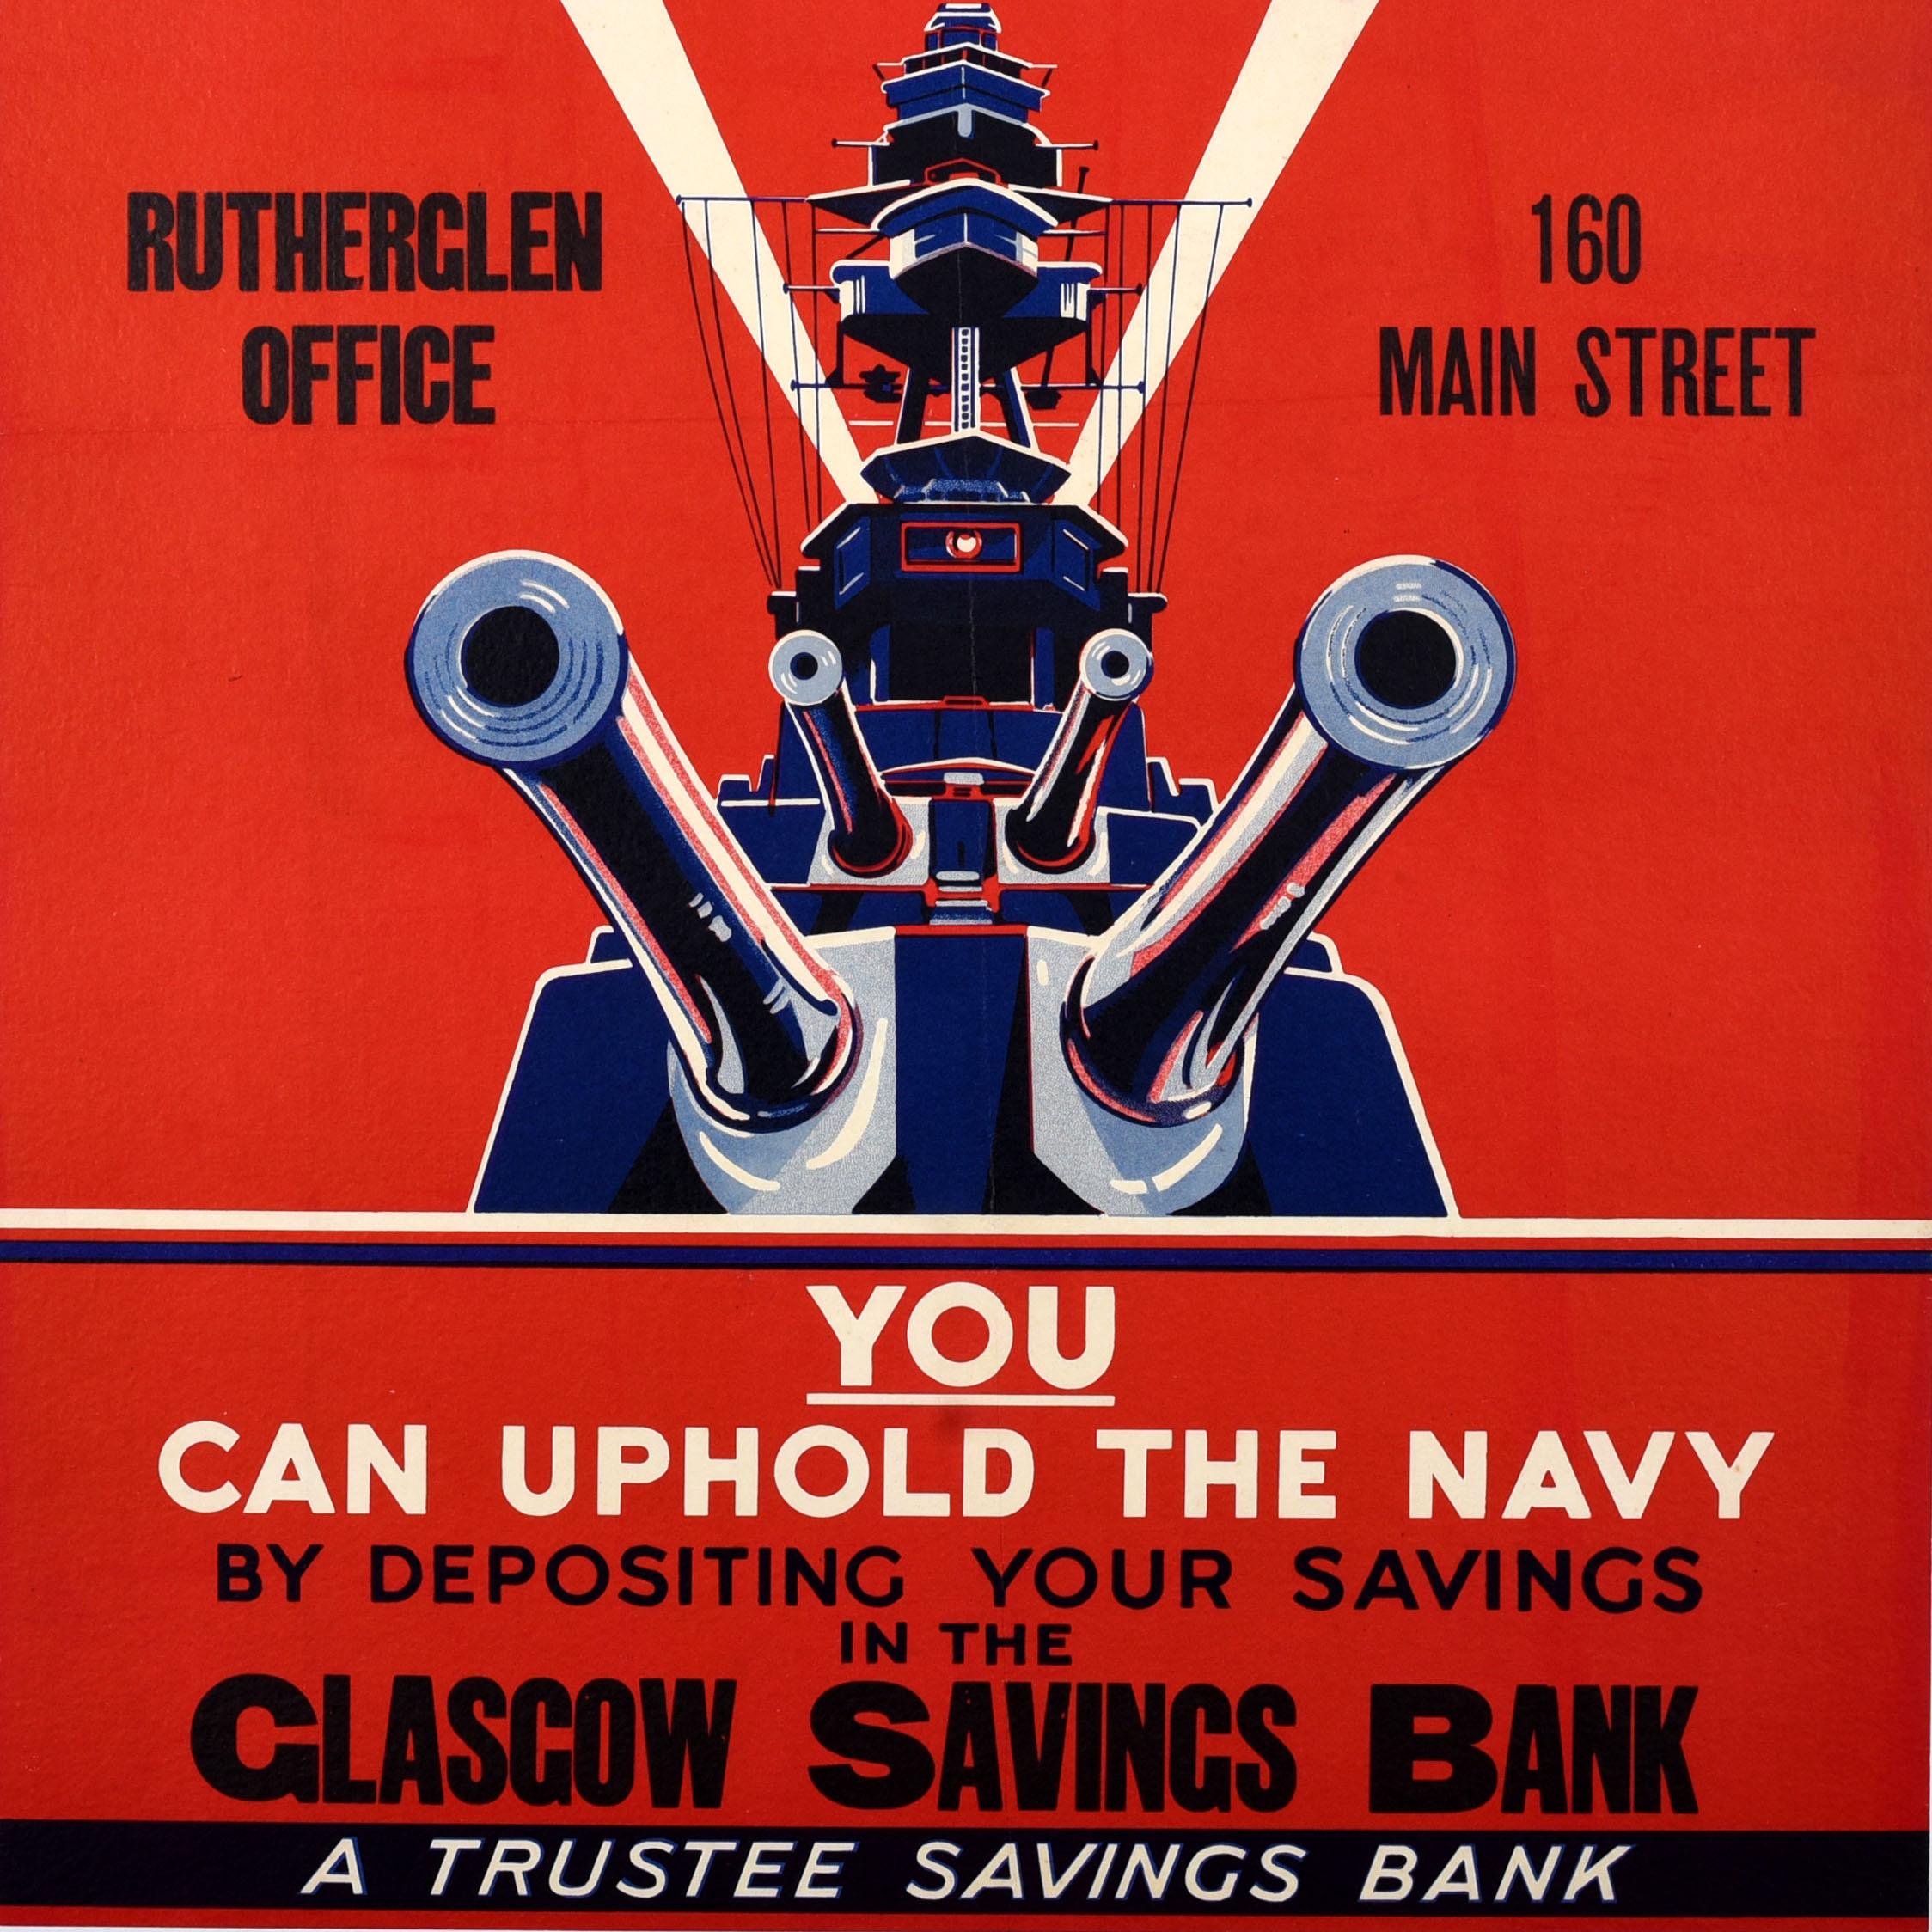 Original vintage World War Two propaganda poster - The Navy Upholds the Victory Torch You can uphold the Navy by depositing your savings in the Glasgow Savings Bank A trustee savings bank Rutherglen Office 160 Main Street - featuring a dynamic